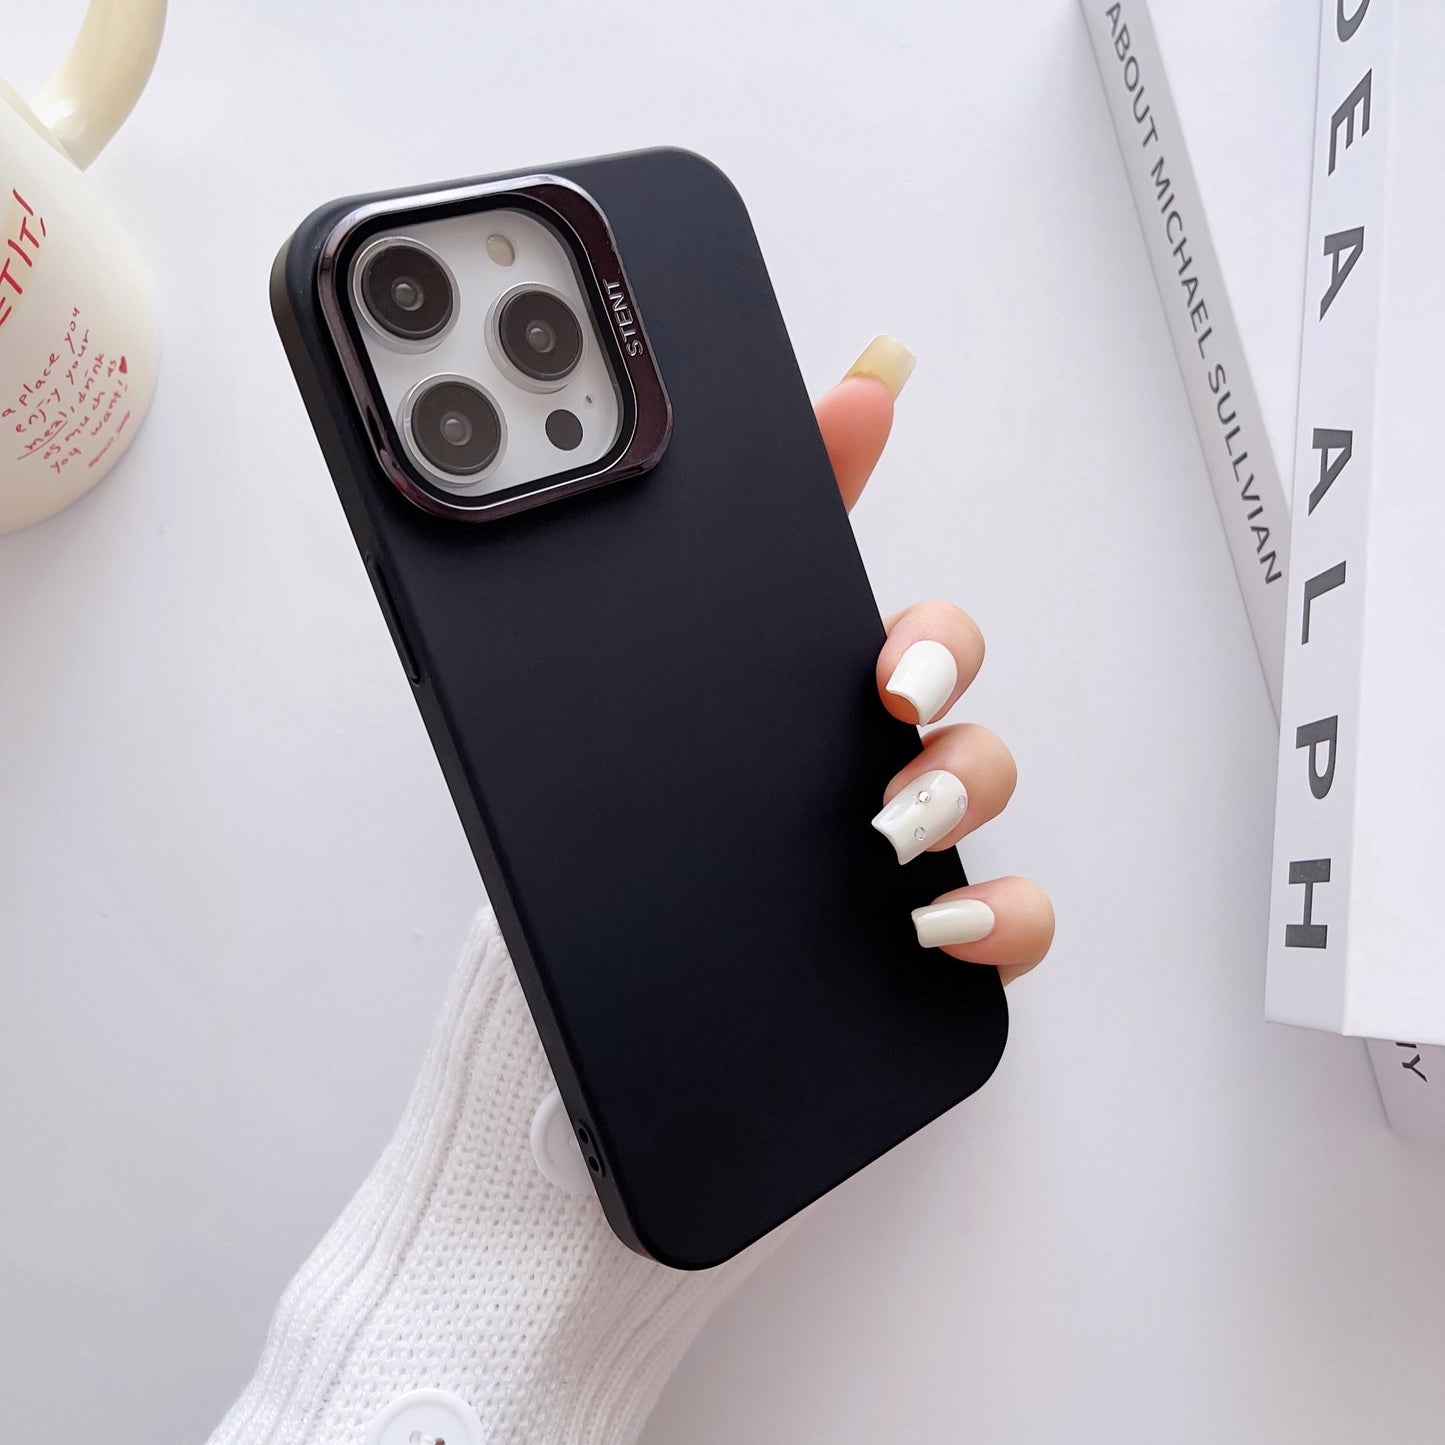 INVISIBLE KICKSTAND & LENS PROTECTOR ULTRA THIN IPHONE CASE